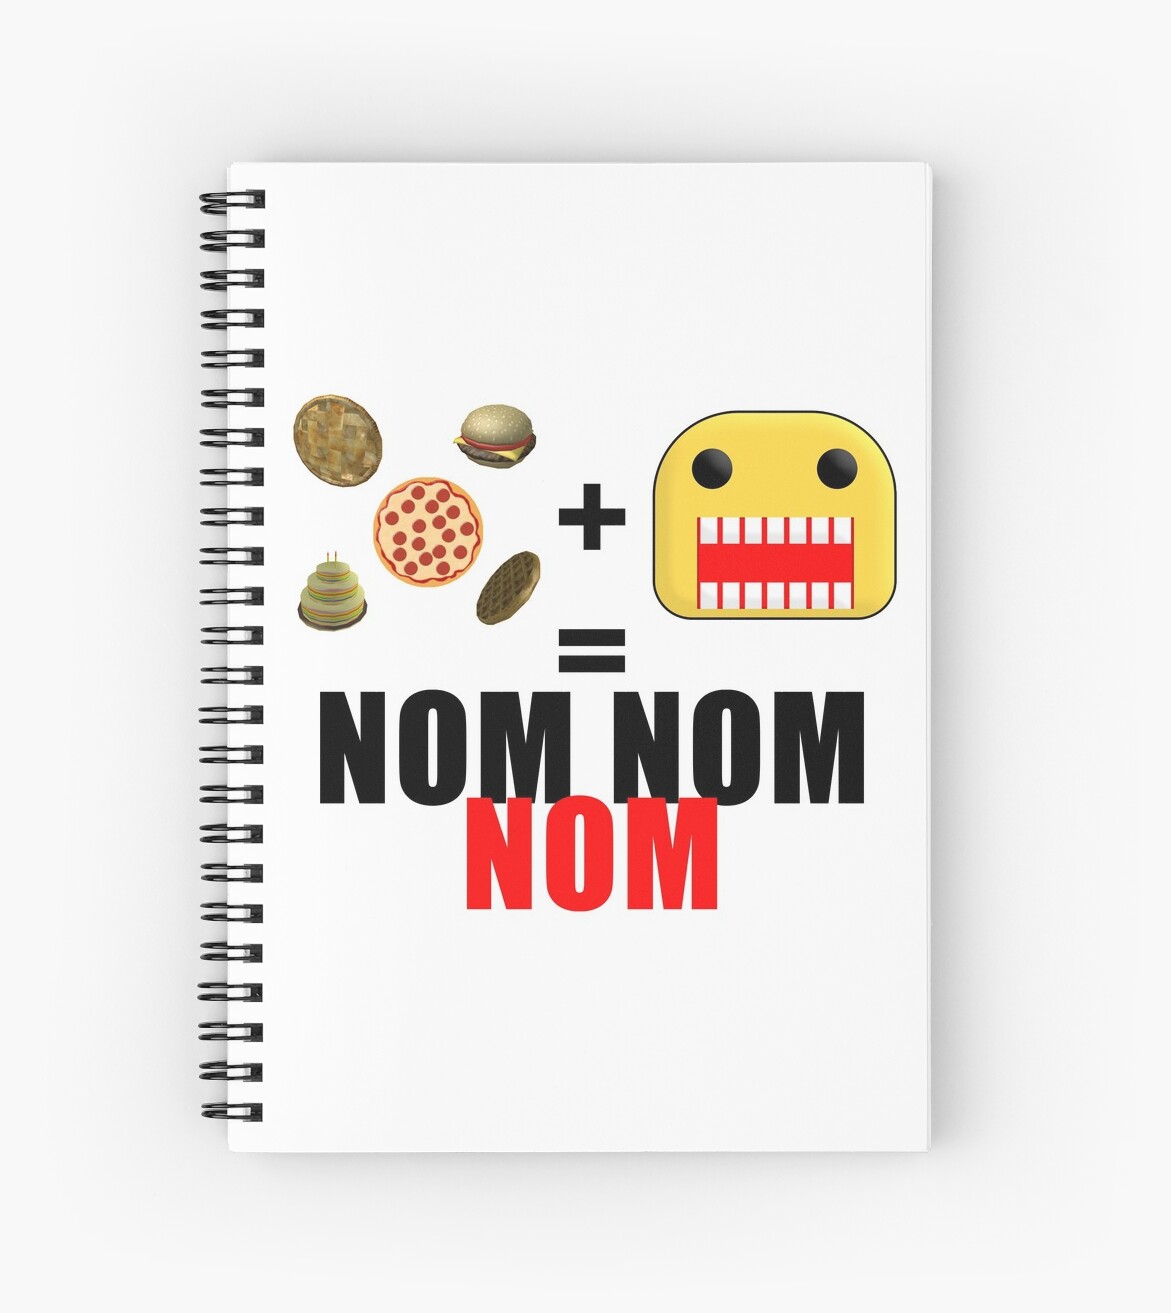 Roblox Get Eaten By The Noob Spiral Notebook By Jenr8d Designs Redbubble - th noob group roblox